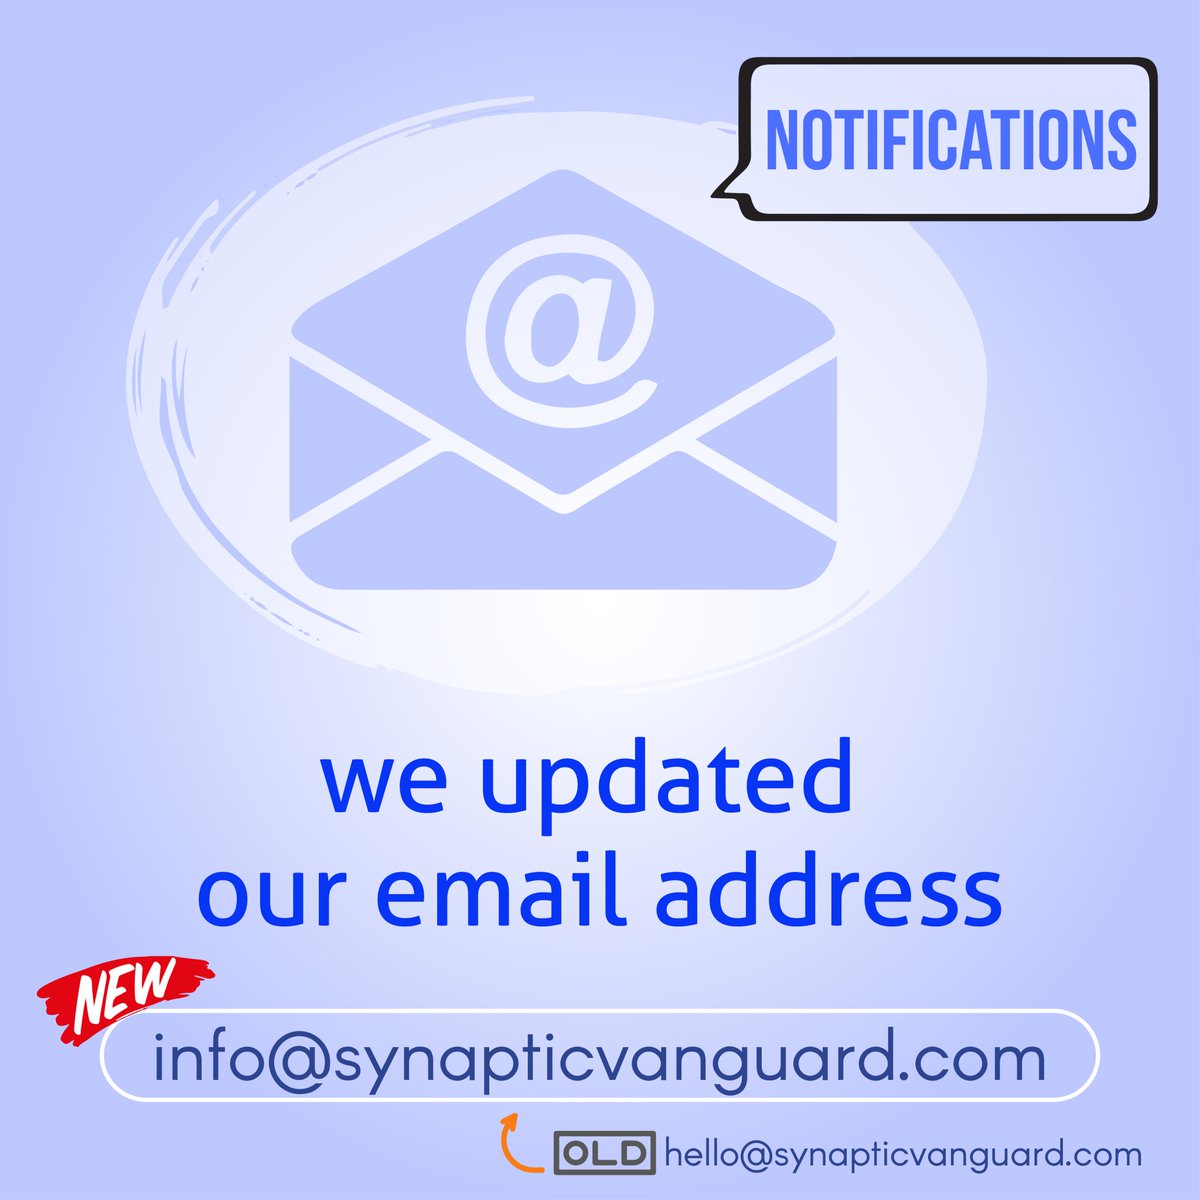 Notifications : we updated our email address.
Contact us at:+974 7446 9729 | info@synapticvanguard.com #svg #SV #qatar2023 #Qatar2022 #QatarProjects #qatar #projects #arabic #qatarexpo #Expo2023